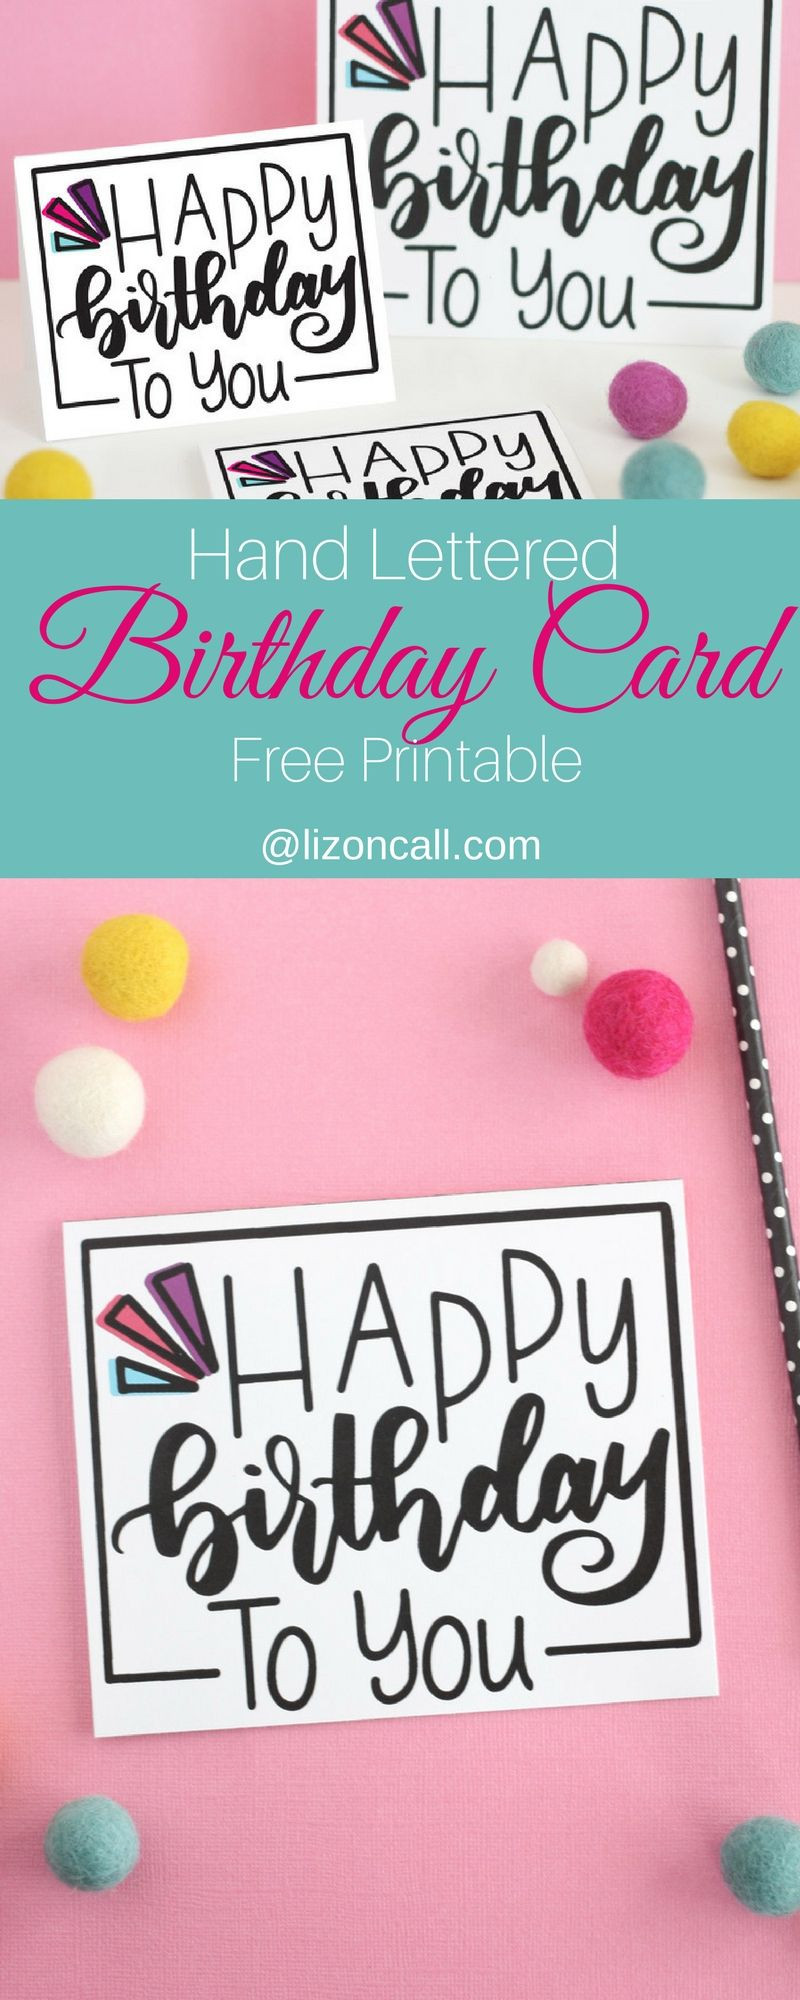 Birthday Card Printouts
 Hand Lettered Free Printable Birthday Card